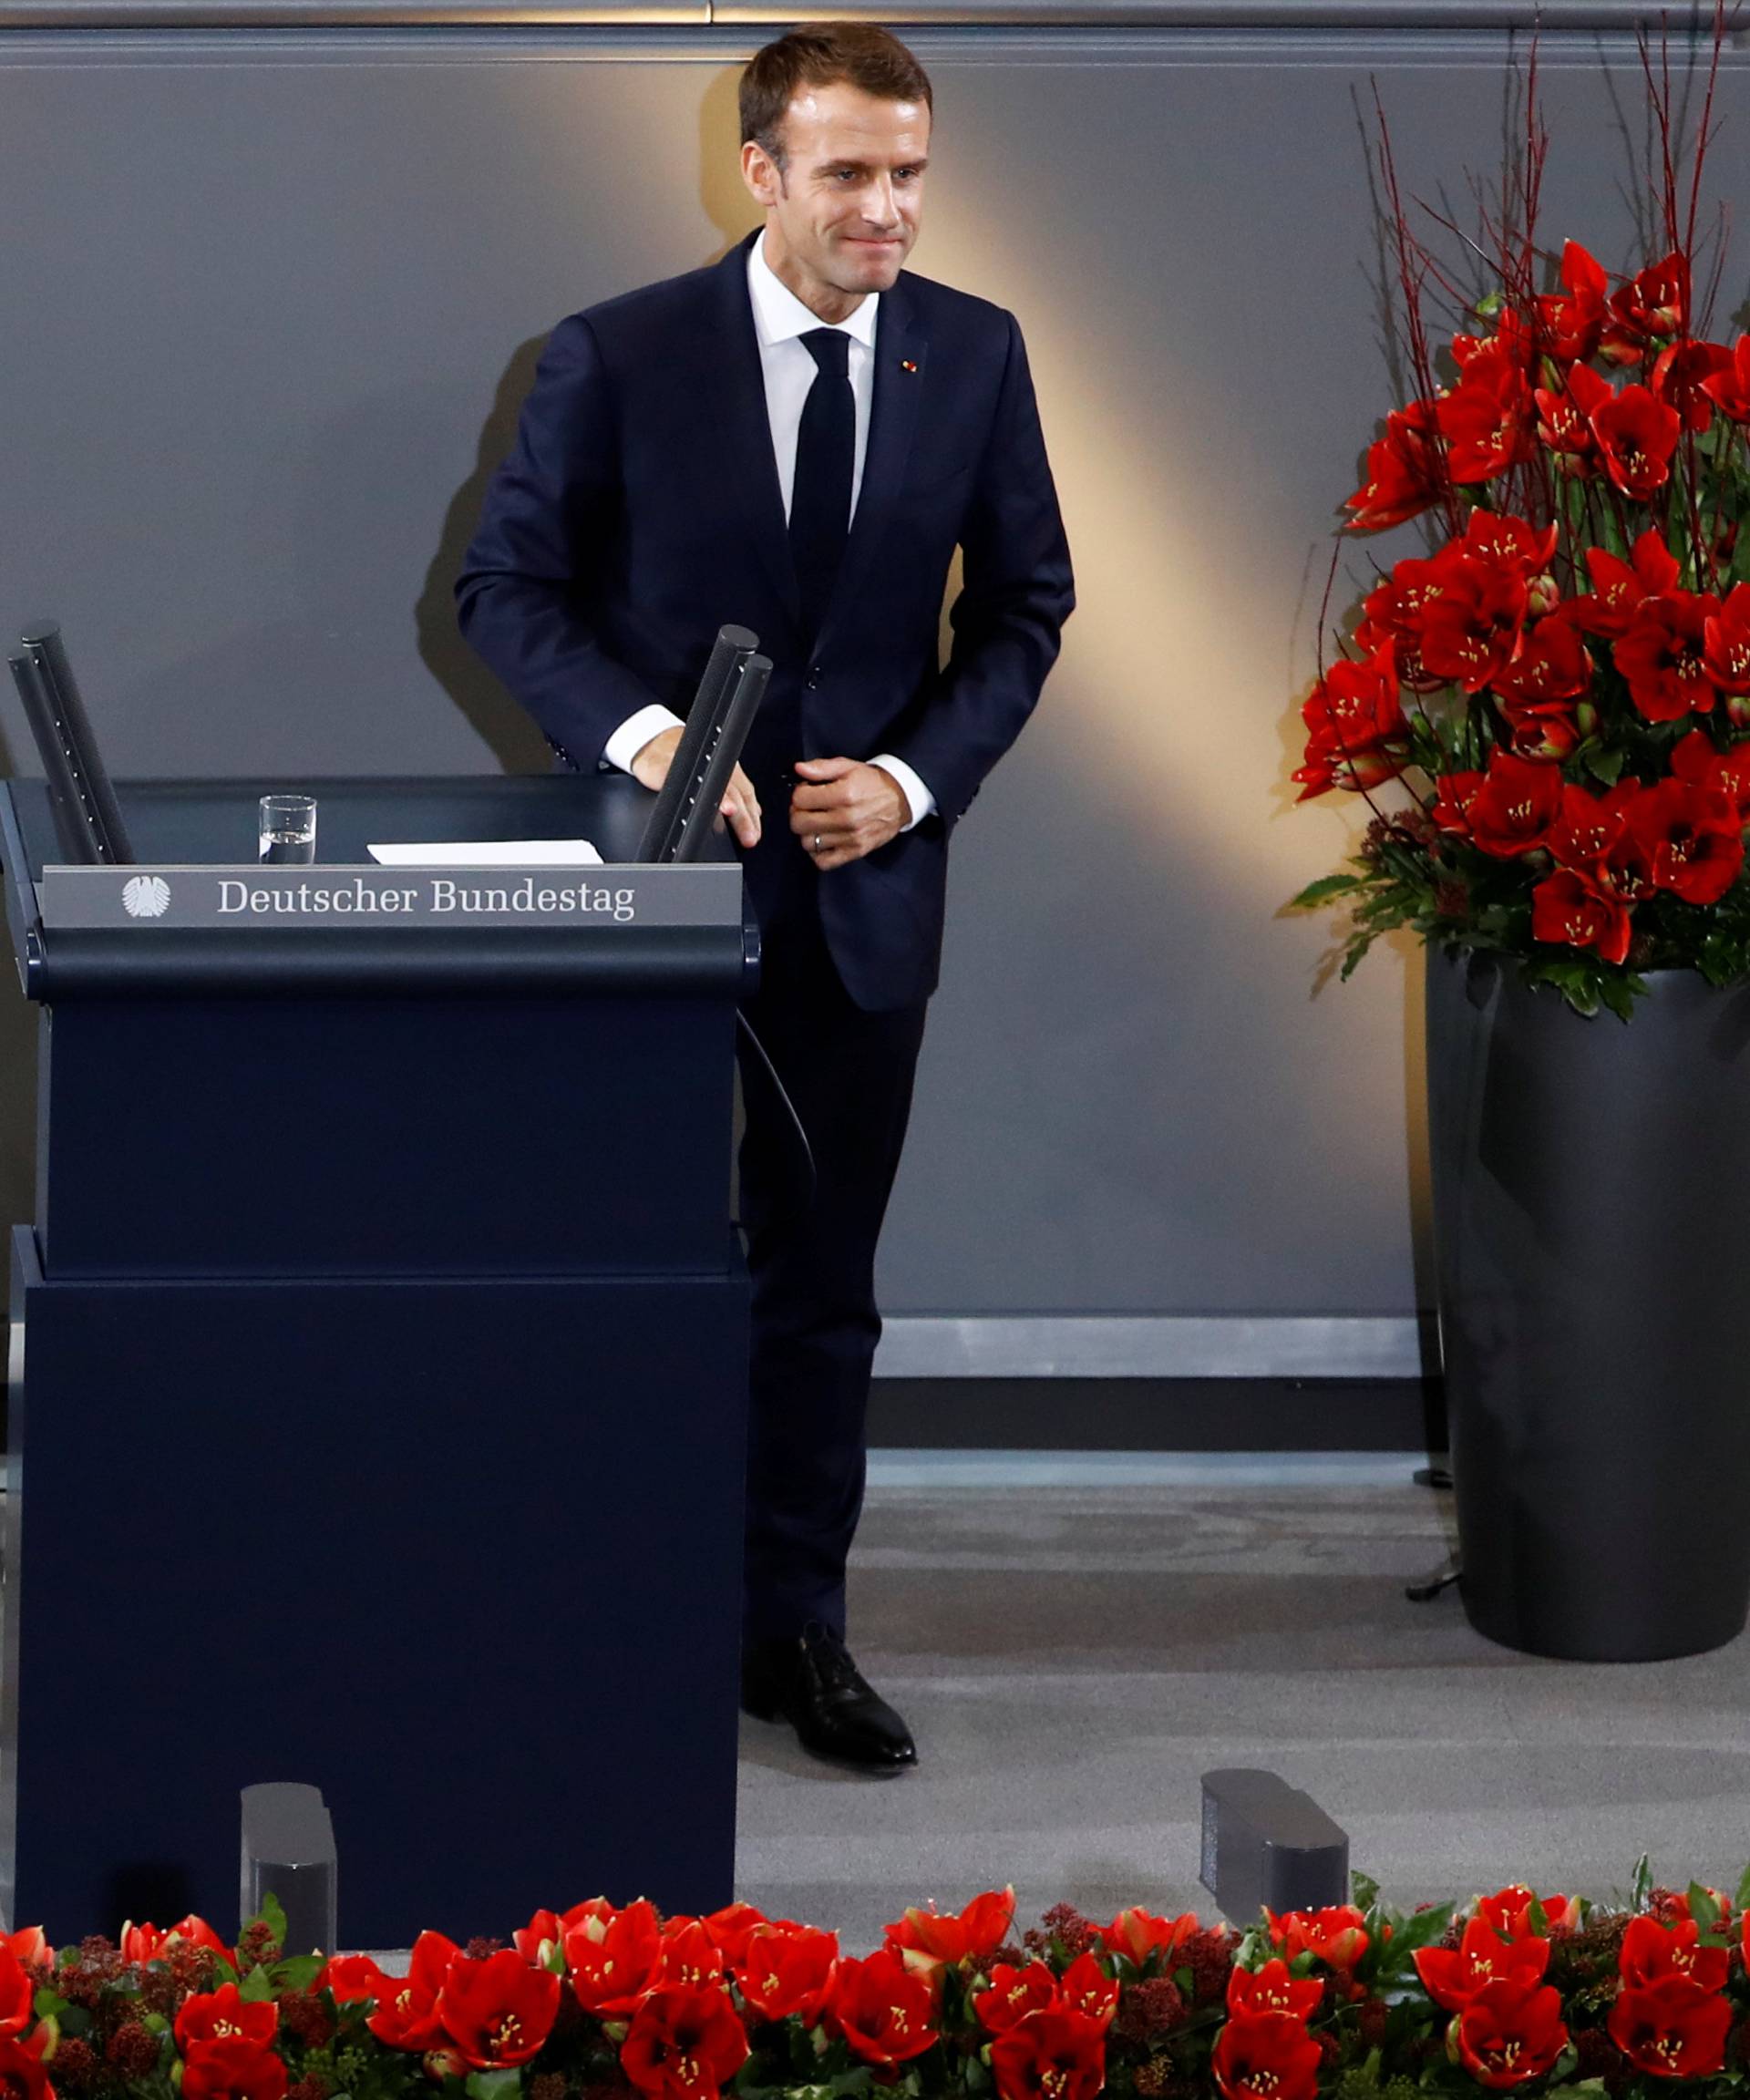 French President Emmanuel Macron is seen after giving a speech during a ceremony at the lower house of parliament Bundestag in the Reichstag building in Berlin to mark National Mourning Day